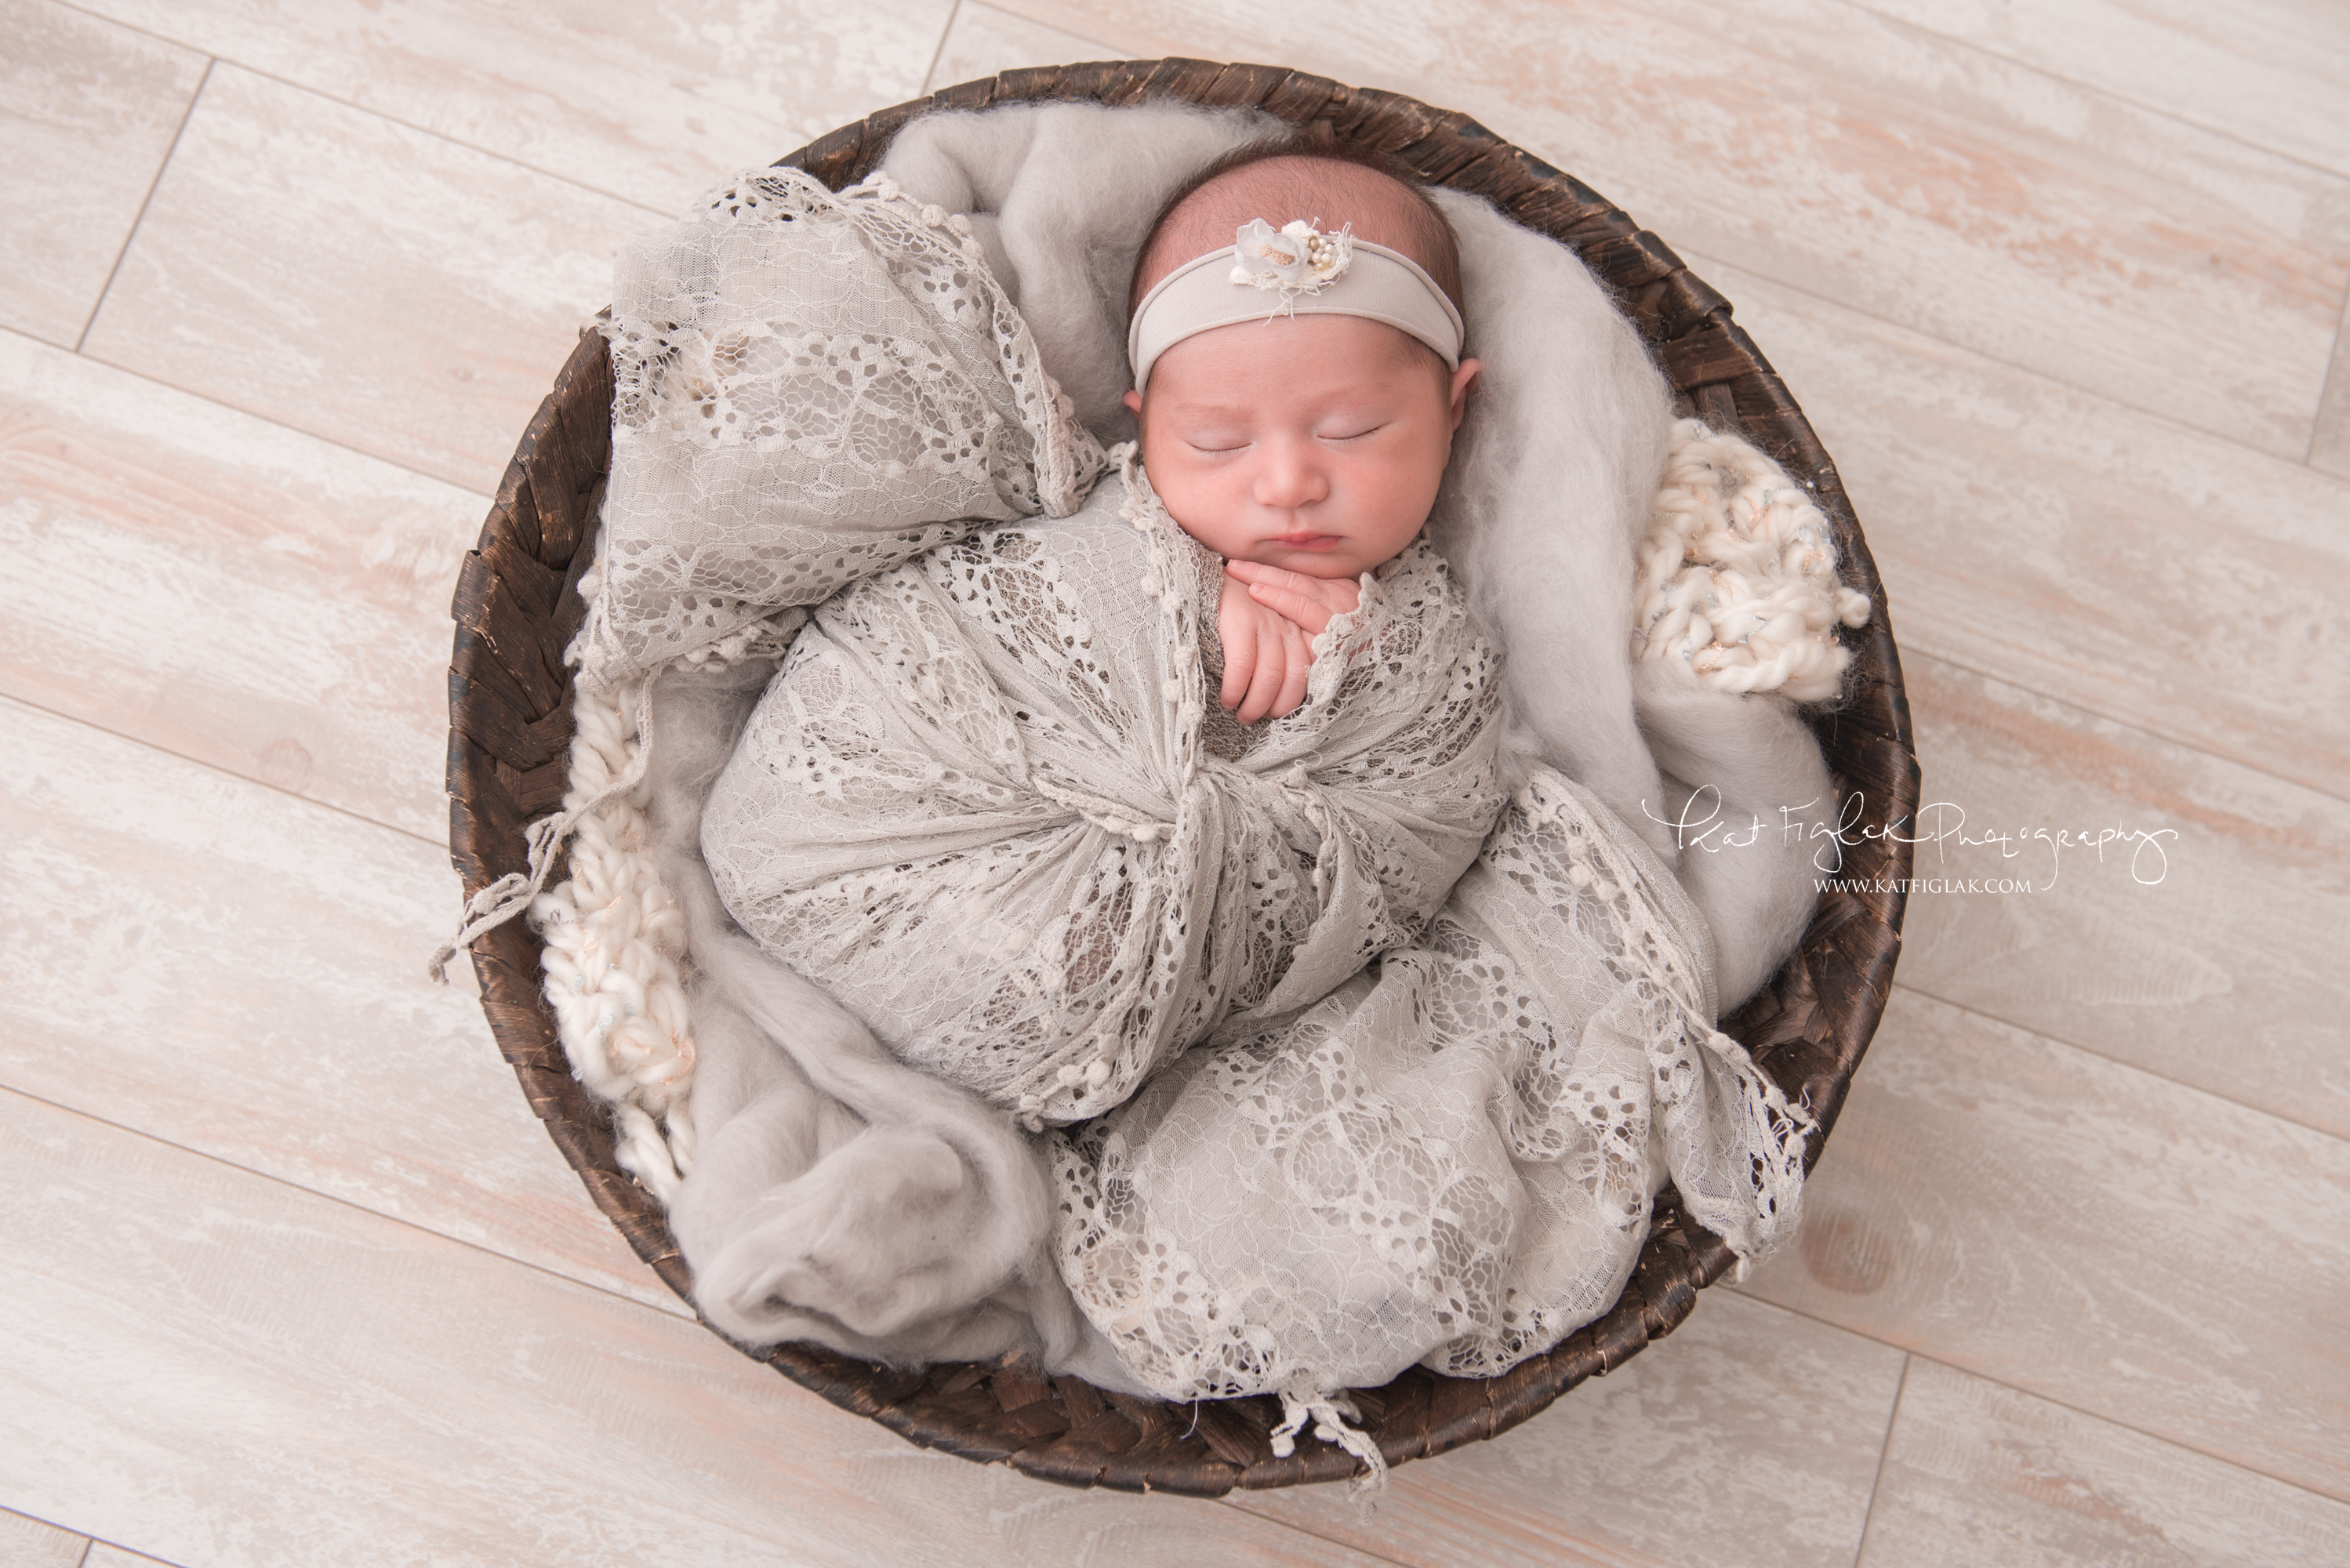 baby swaddled in gray lace wrap in basket